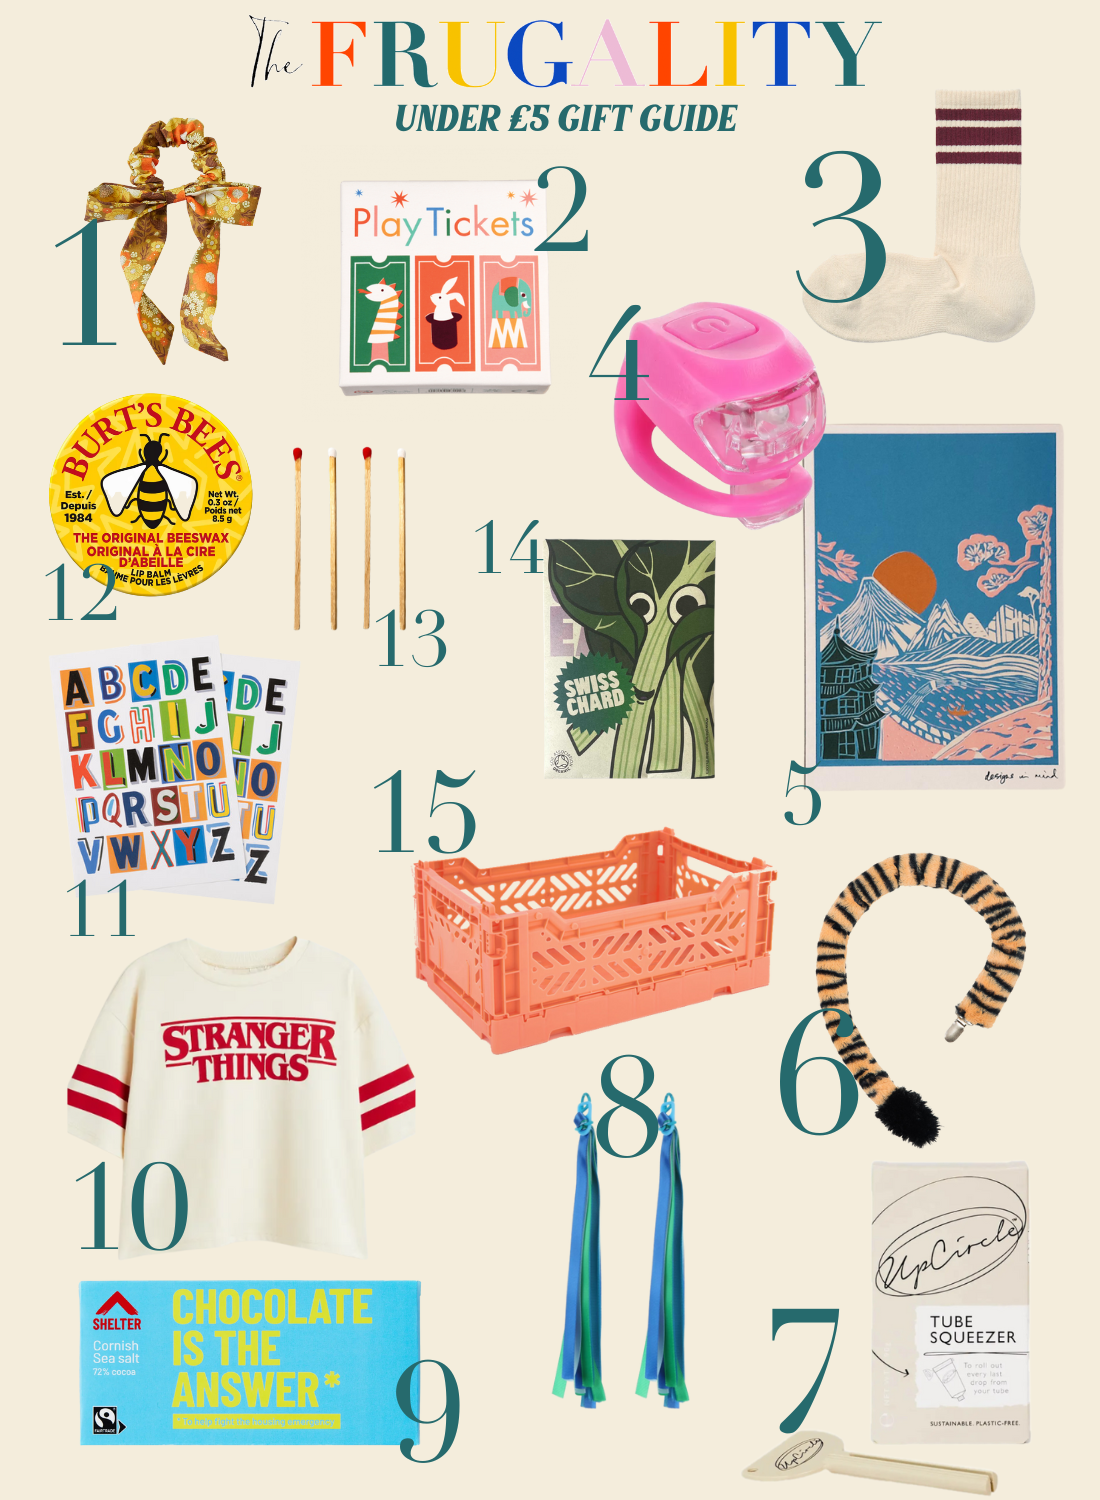 UNDER £5 GIFT GUIDE